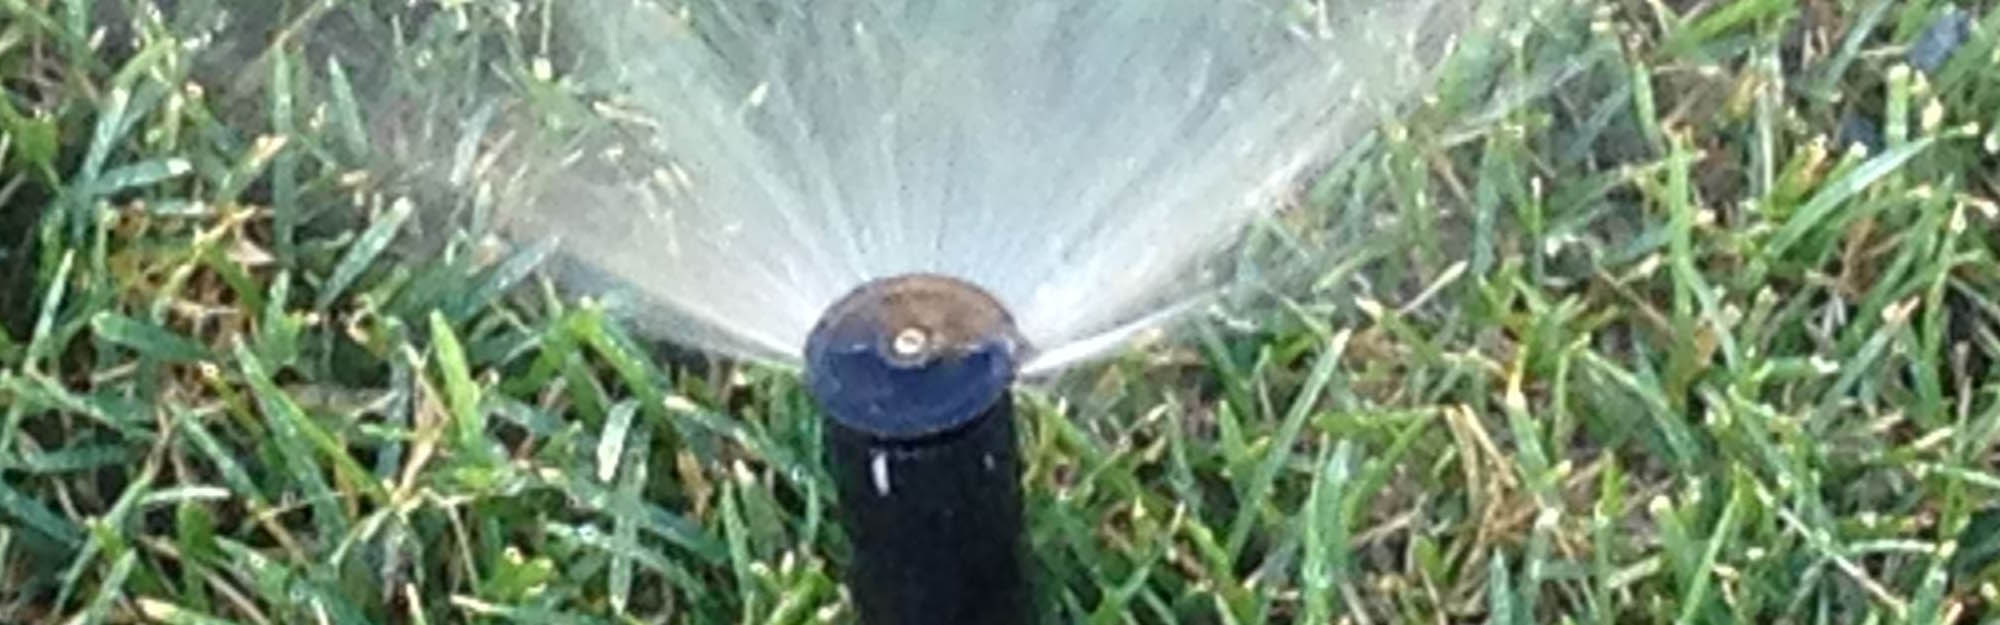 One sprinkler type used to water tuffgrass.